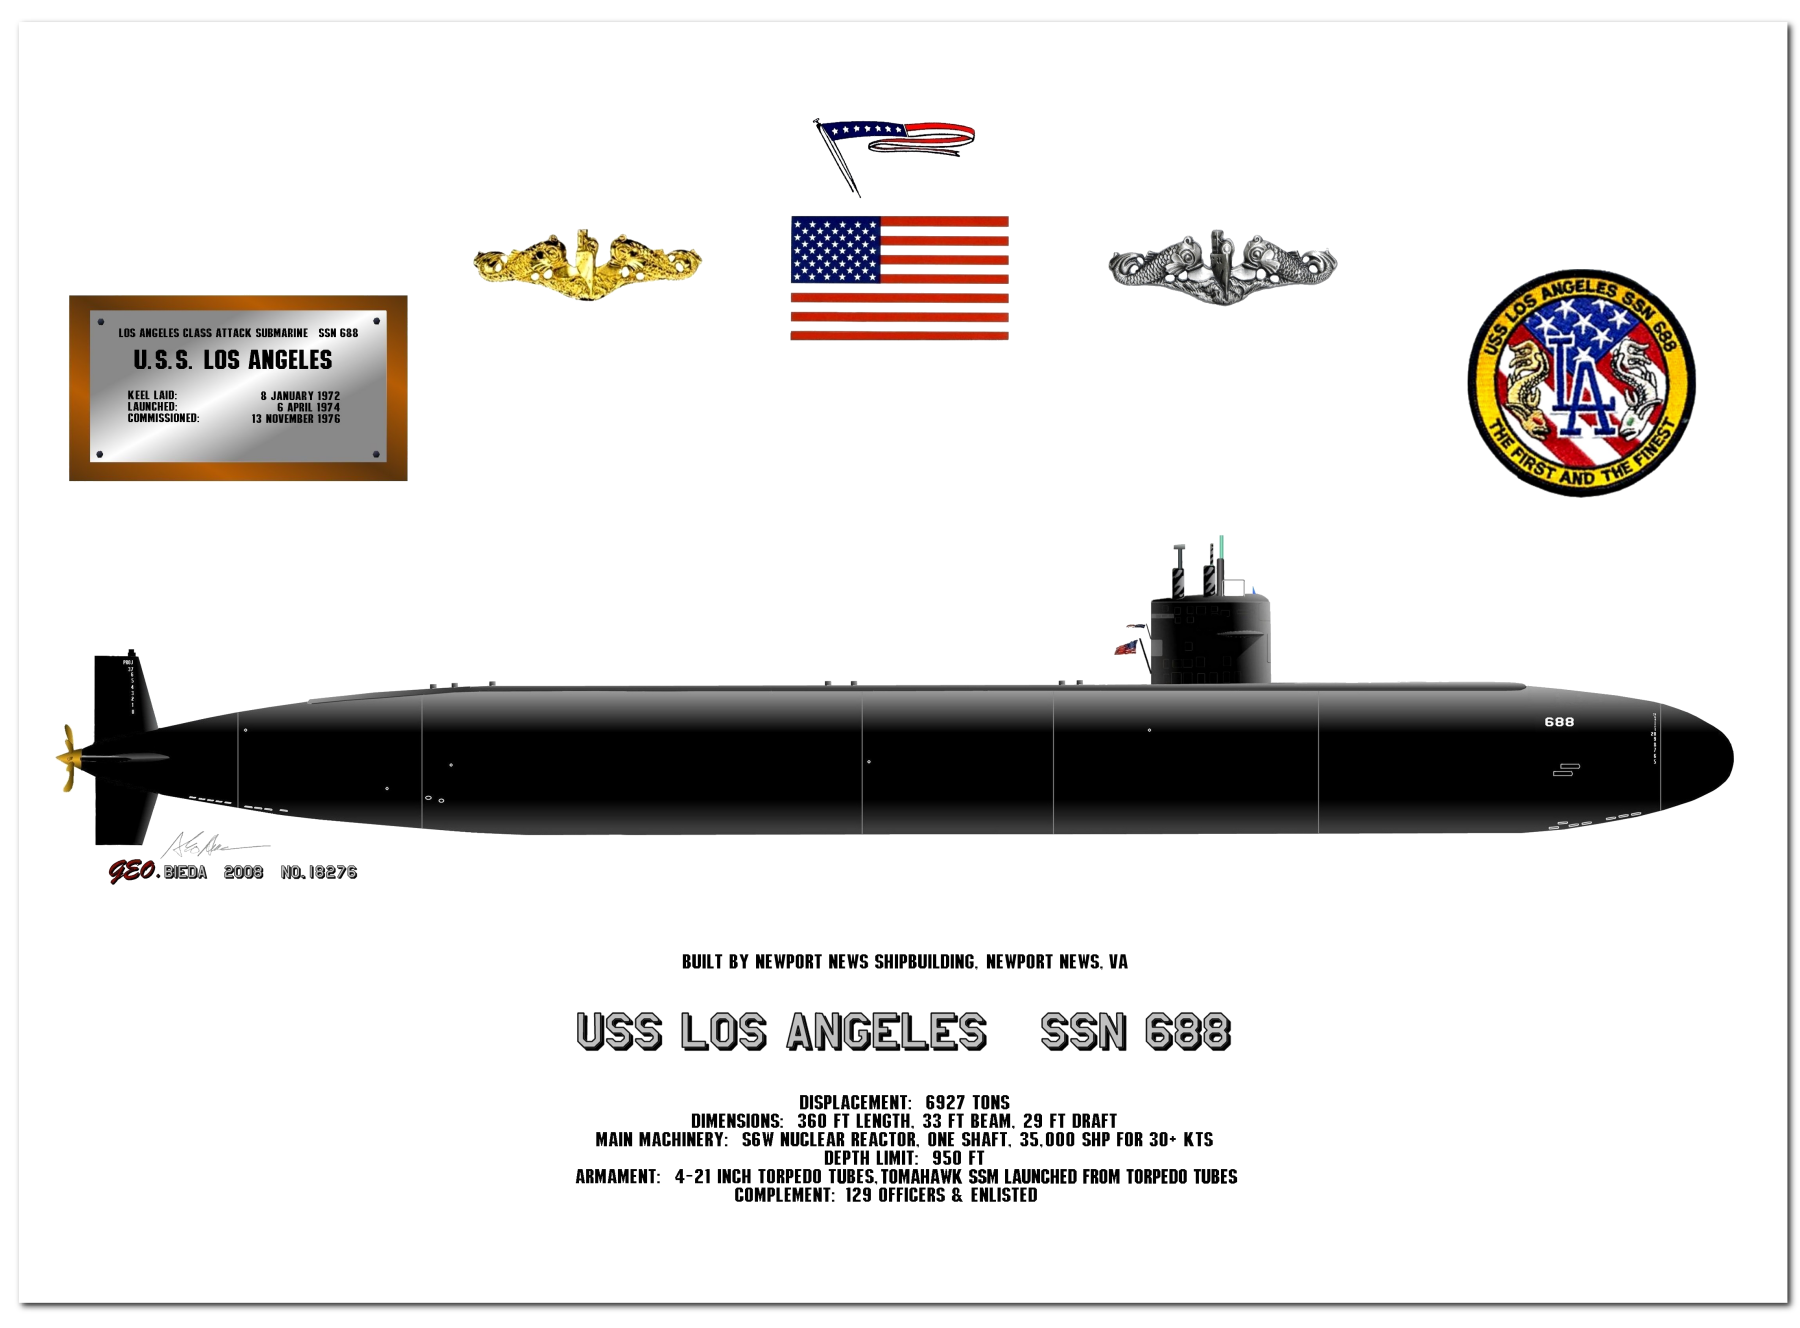 Los Angeles Class Nuclear Fast Attack Submarines